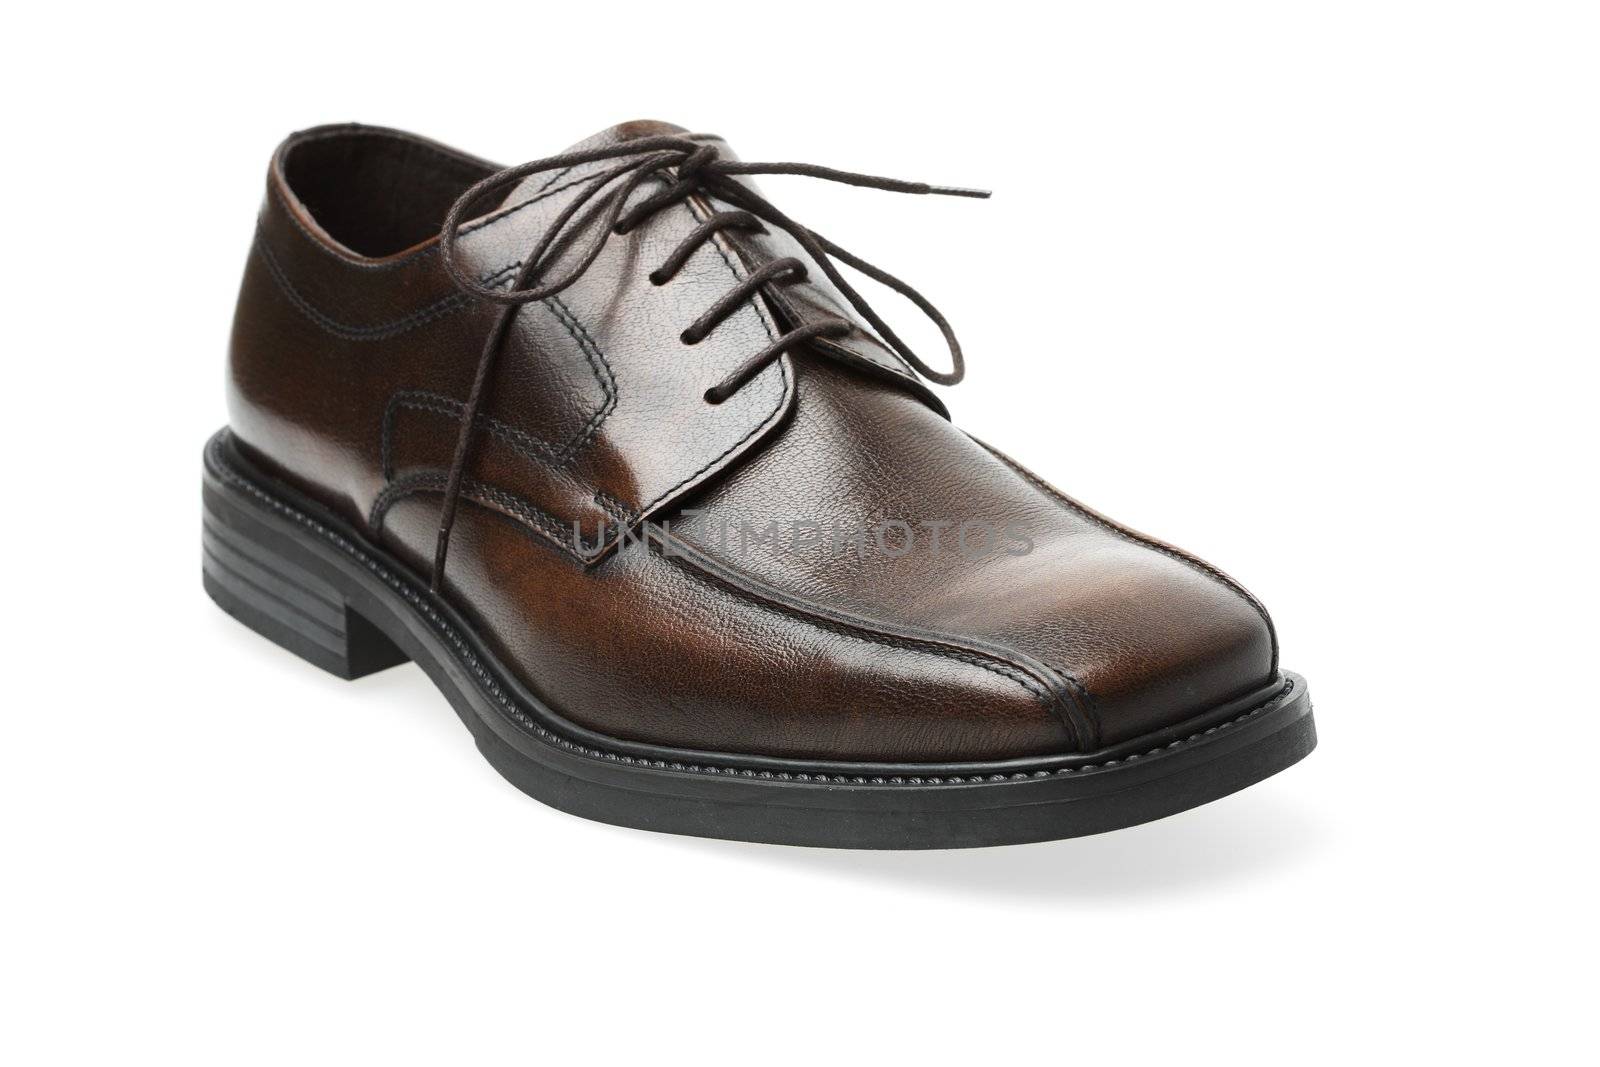 Brown Leather Shoe by Stocksnapper